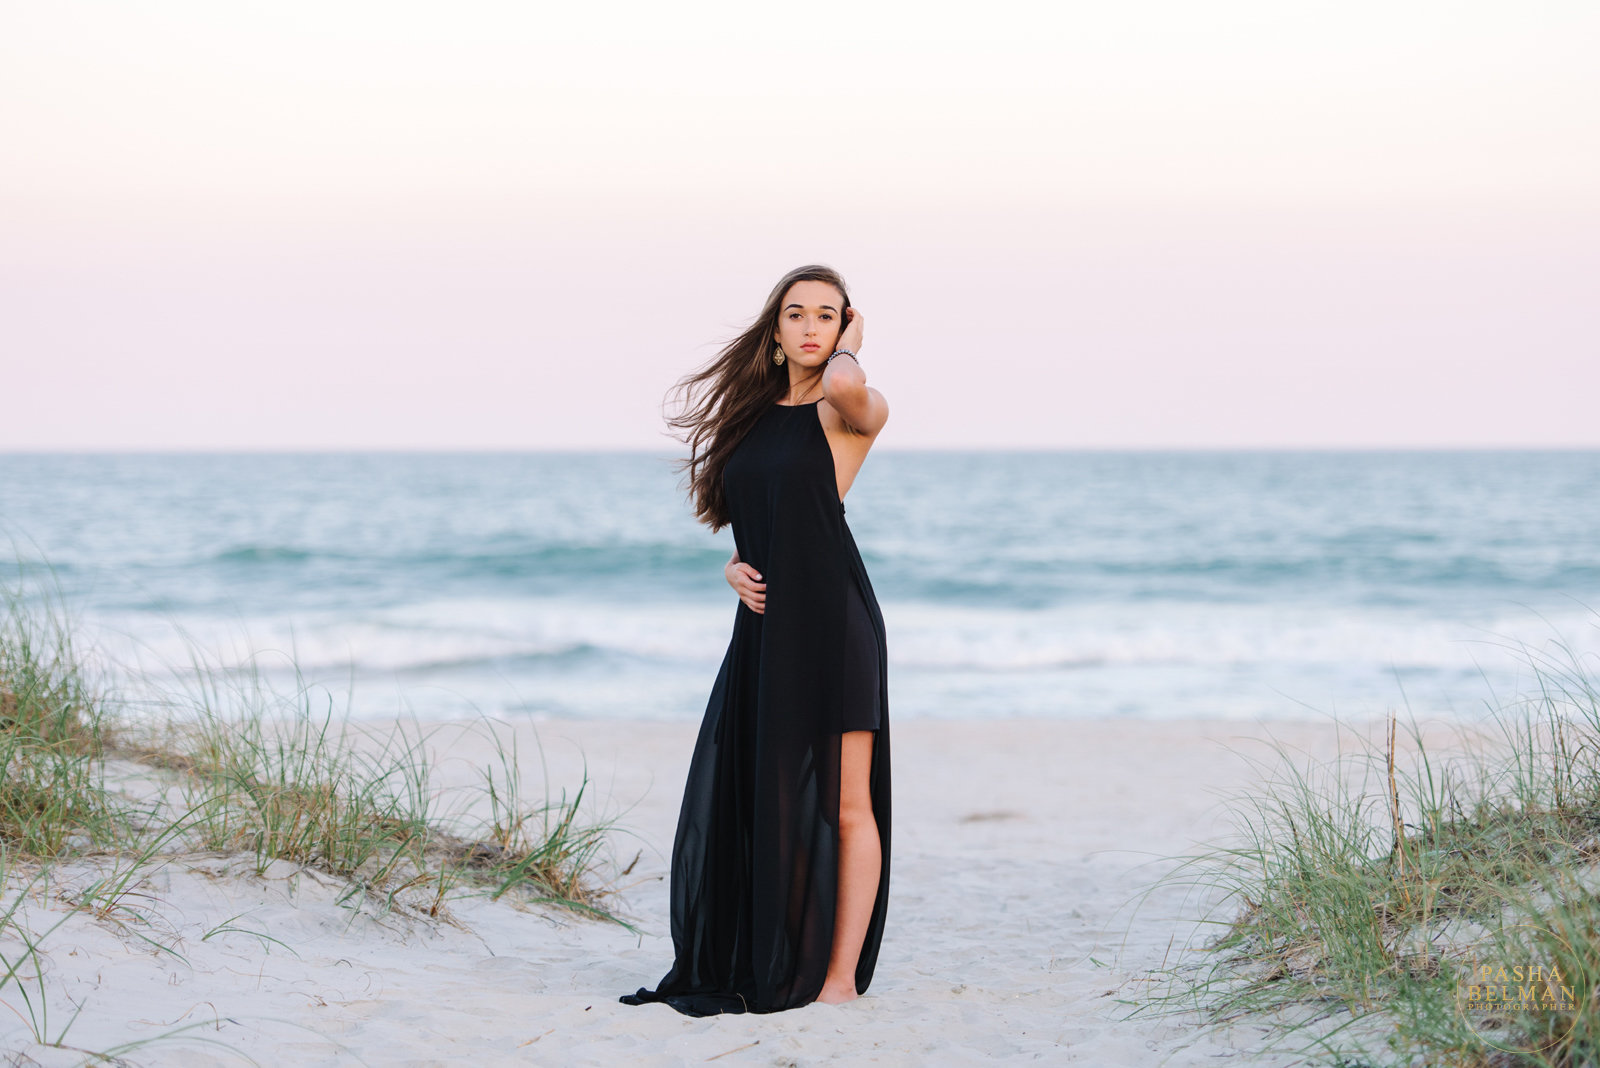 High School Senior Portrait Photography and Senior Pictures in Myrtle Beach